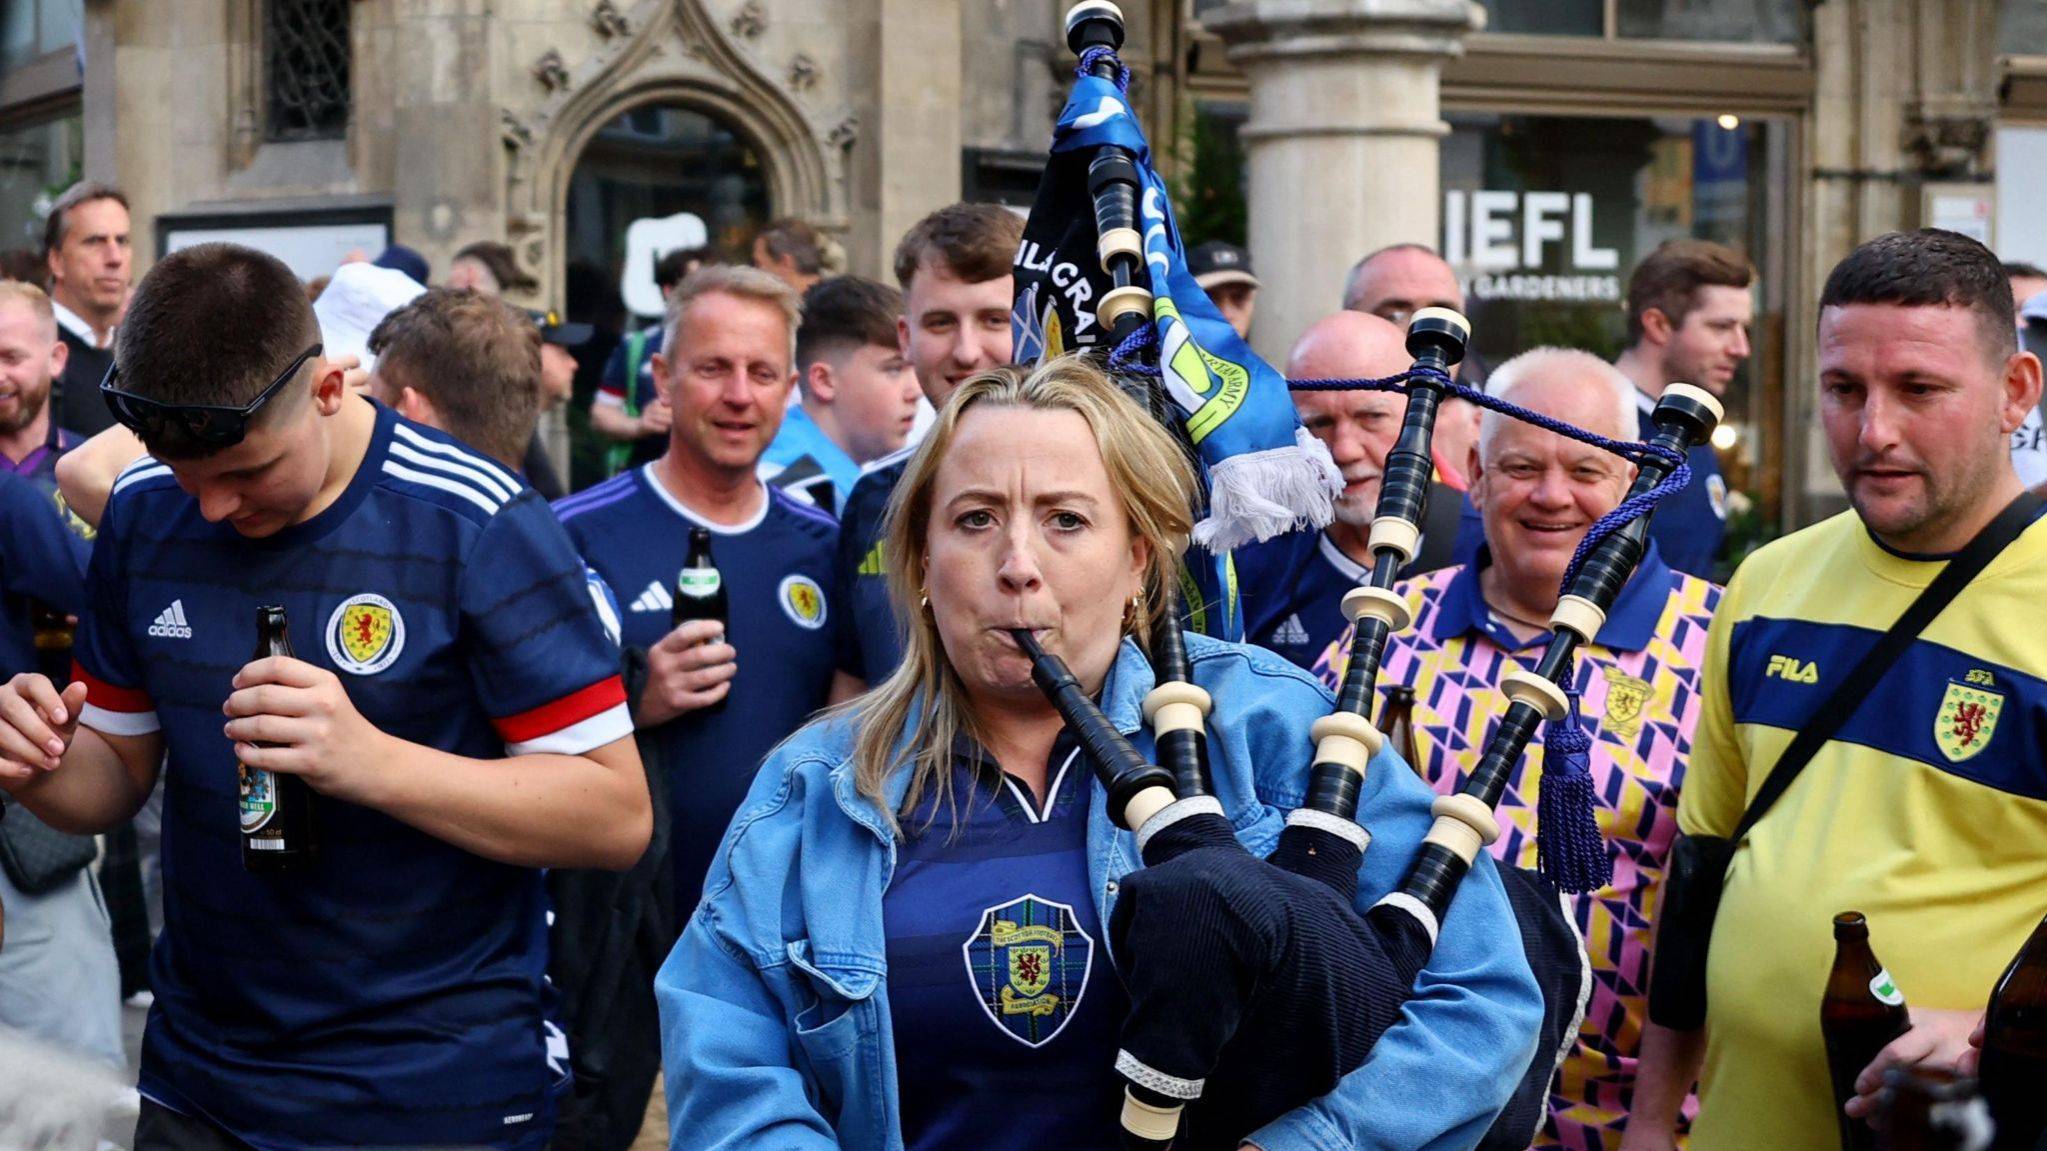 Alternative First! If Scotland Reaches the Euro Final, Fans Could Spend an Average of €11,000